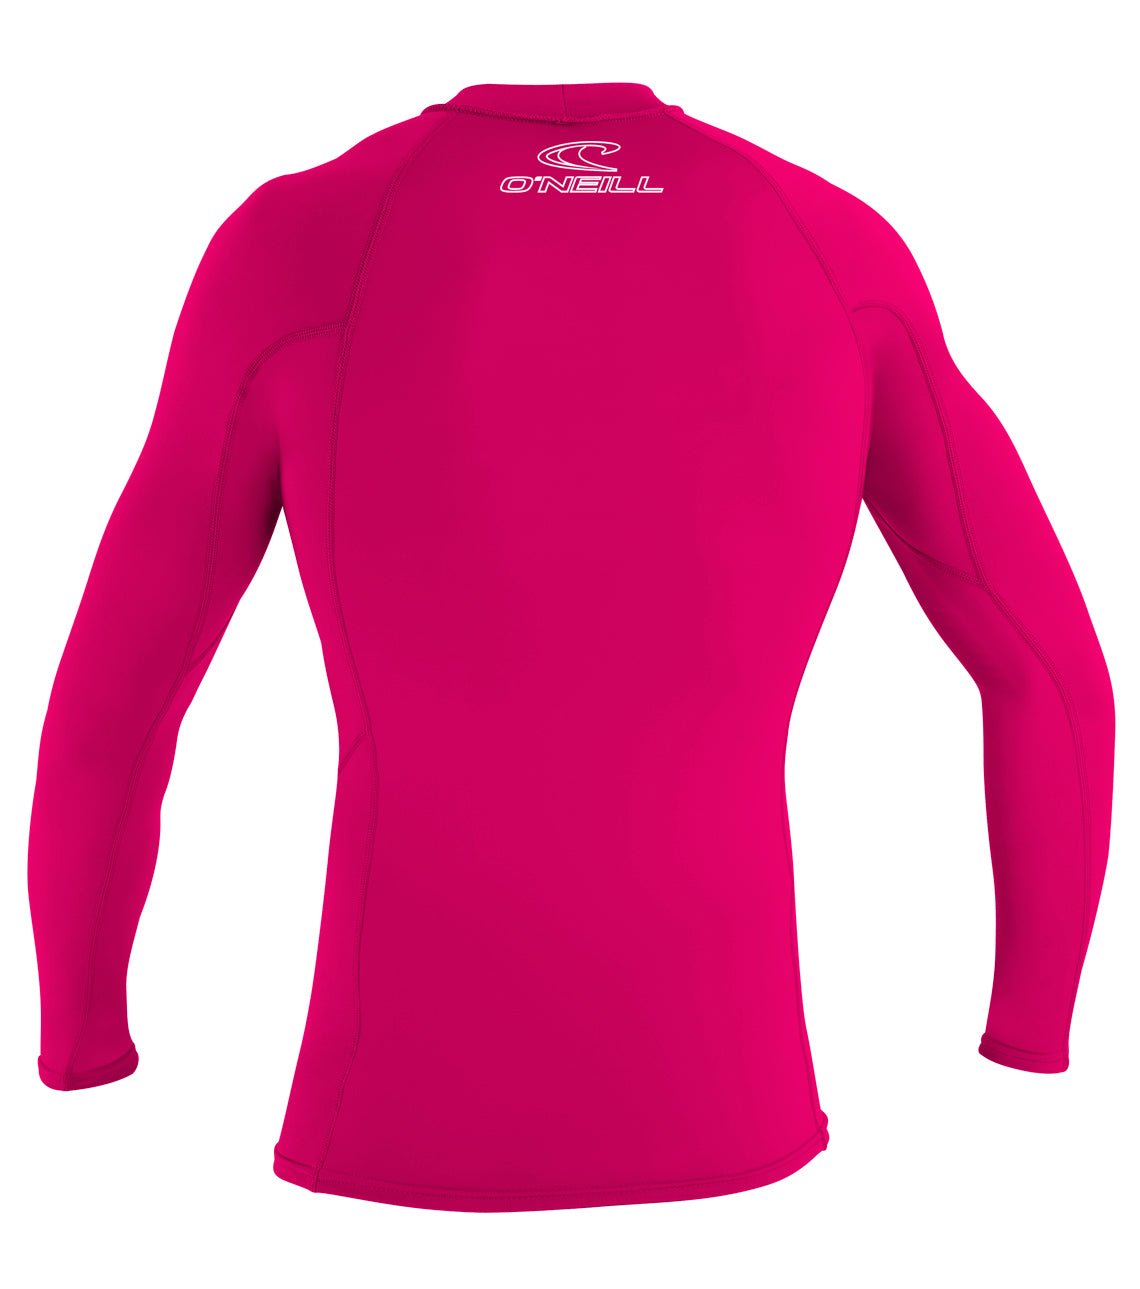 O'Neill Youth Basic Skins L/S Rash Guard - Worthing Watersports - 3346-182-4 - Tops - O'Neill